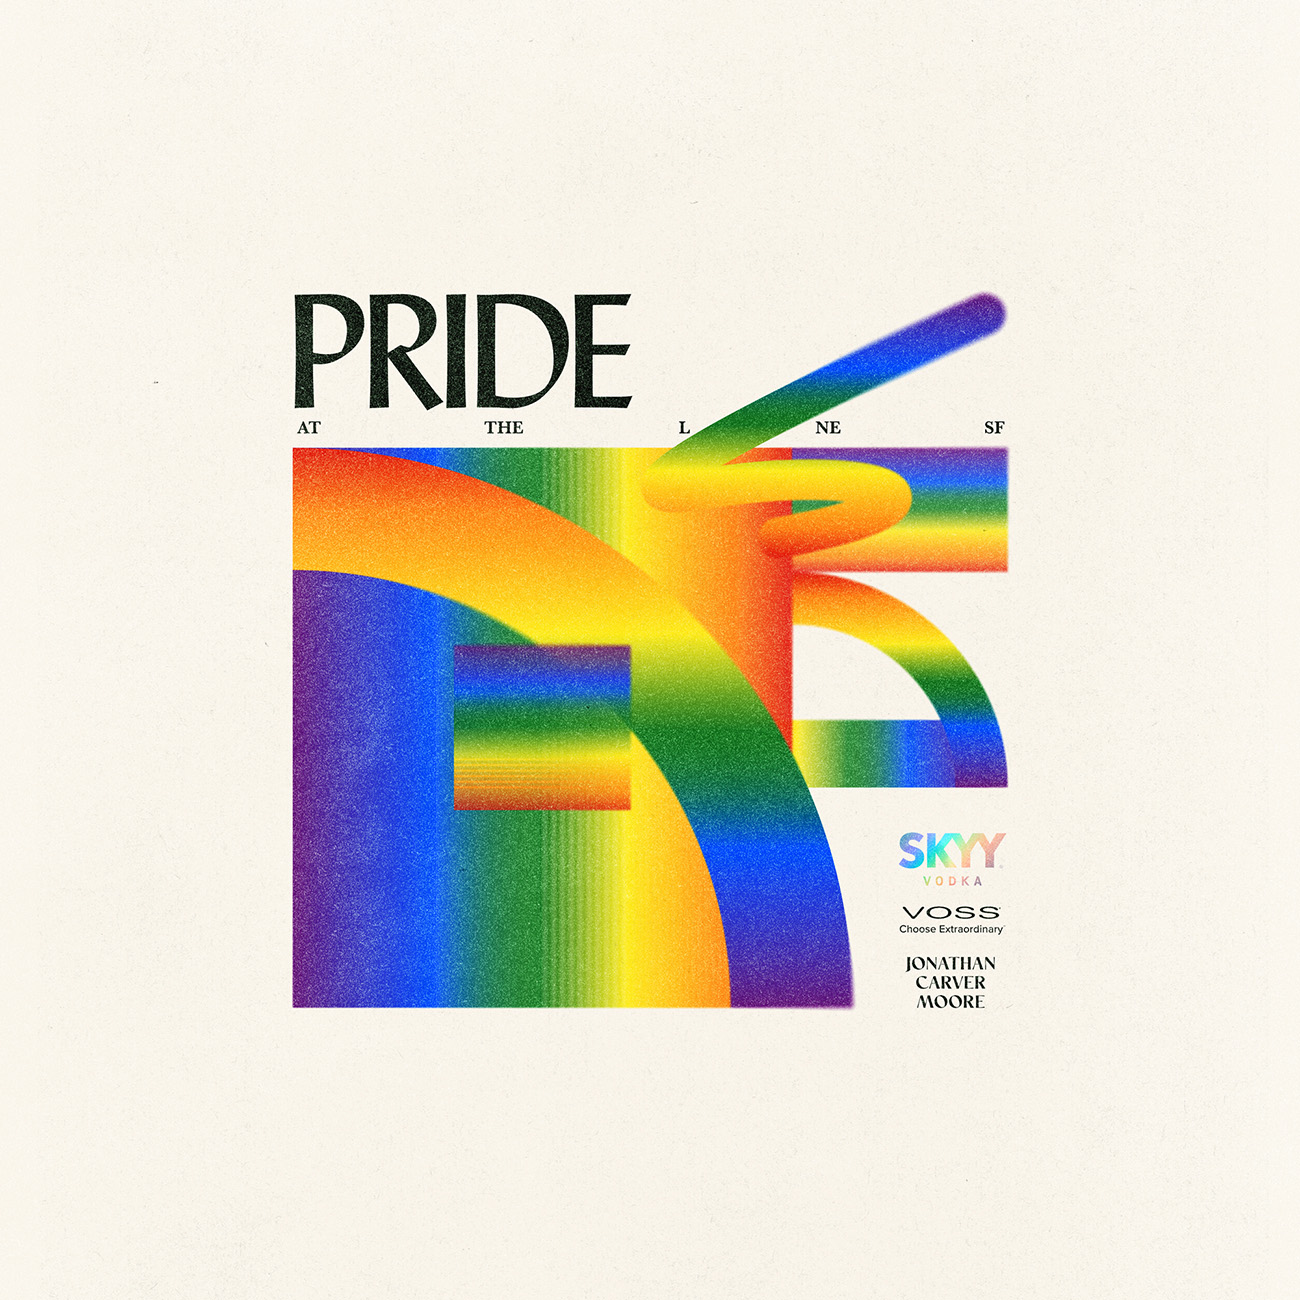 The brochure features "PRIDE" with an image and accompanying description.